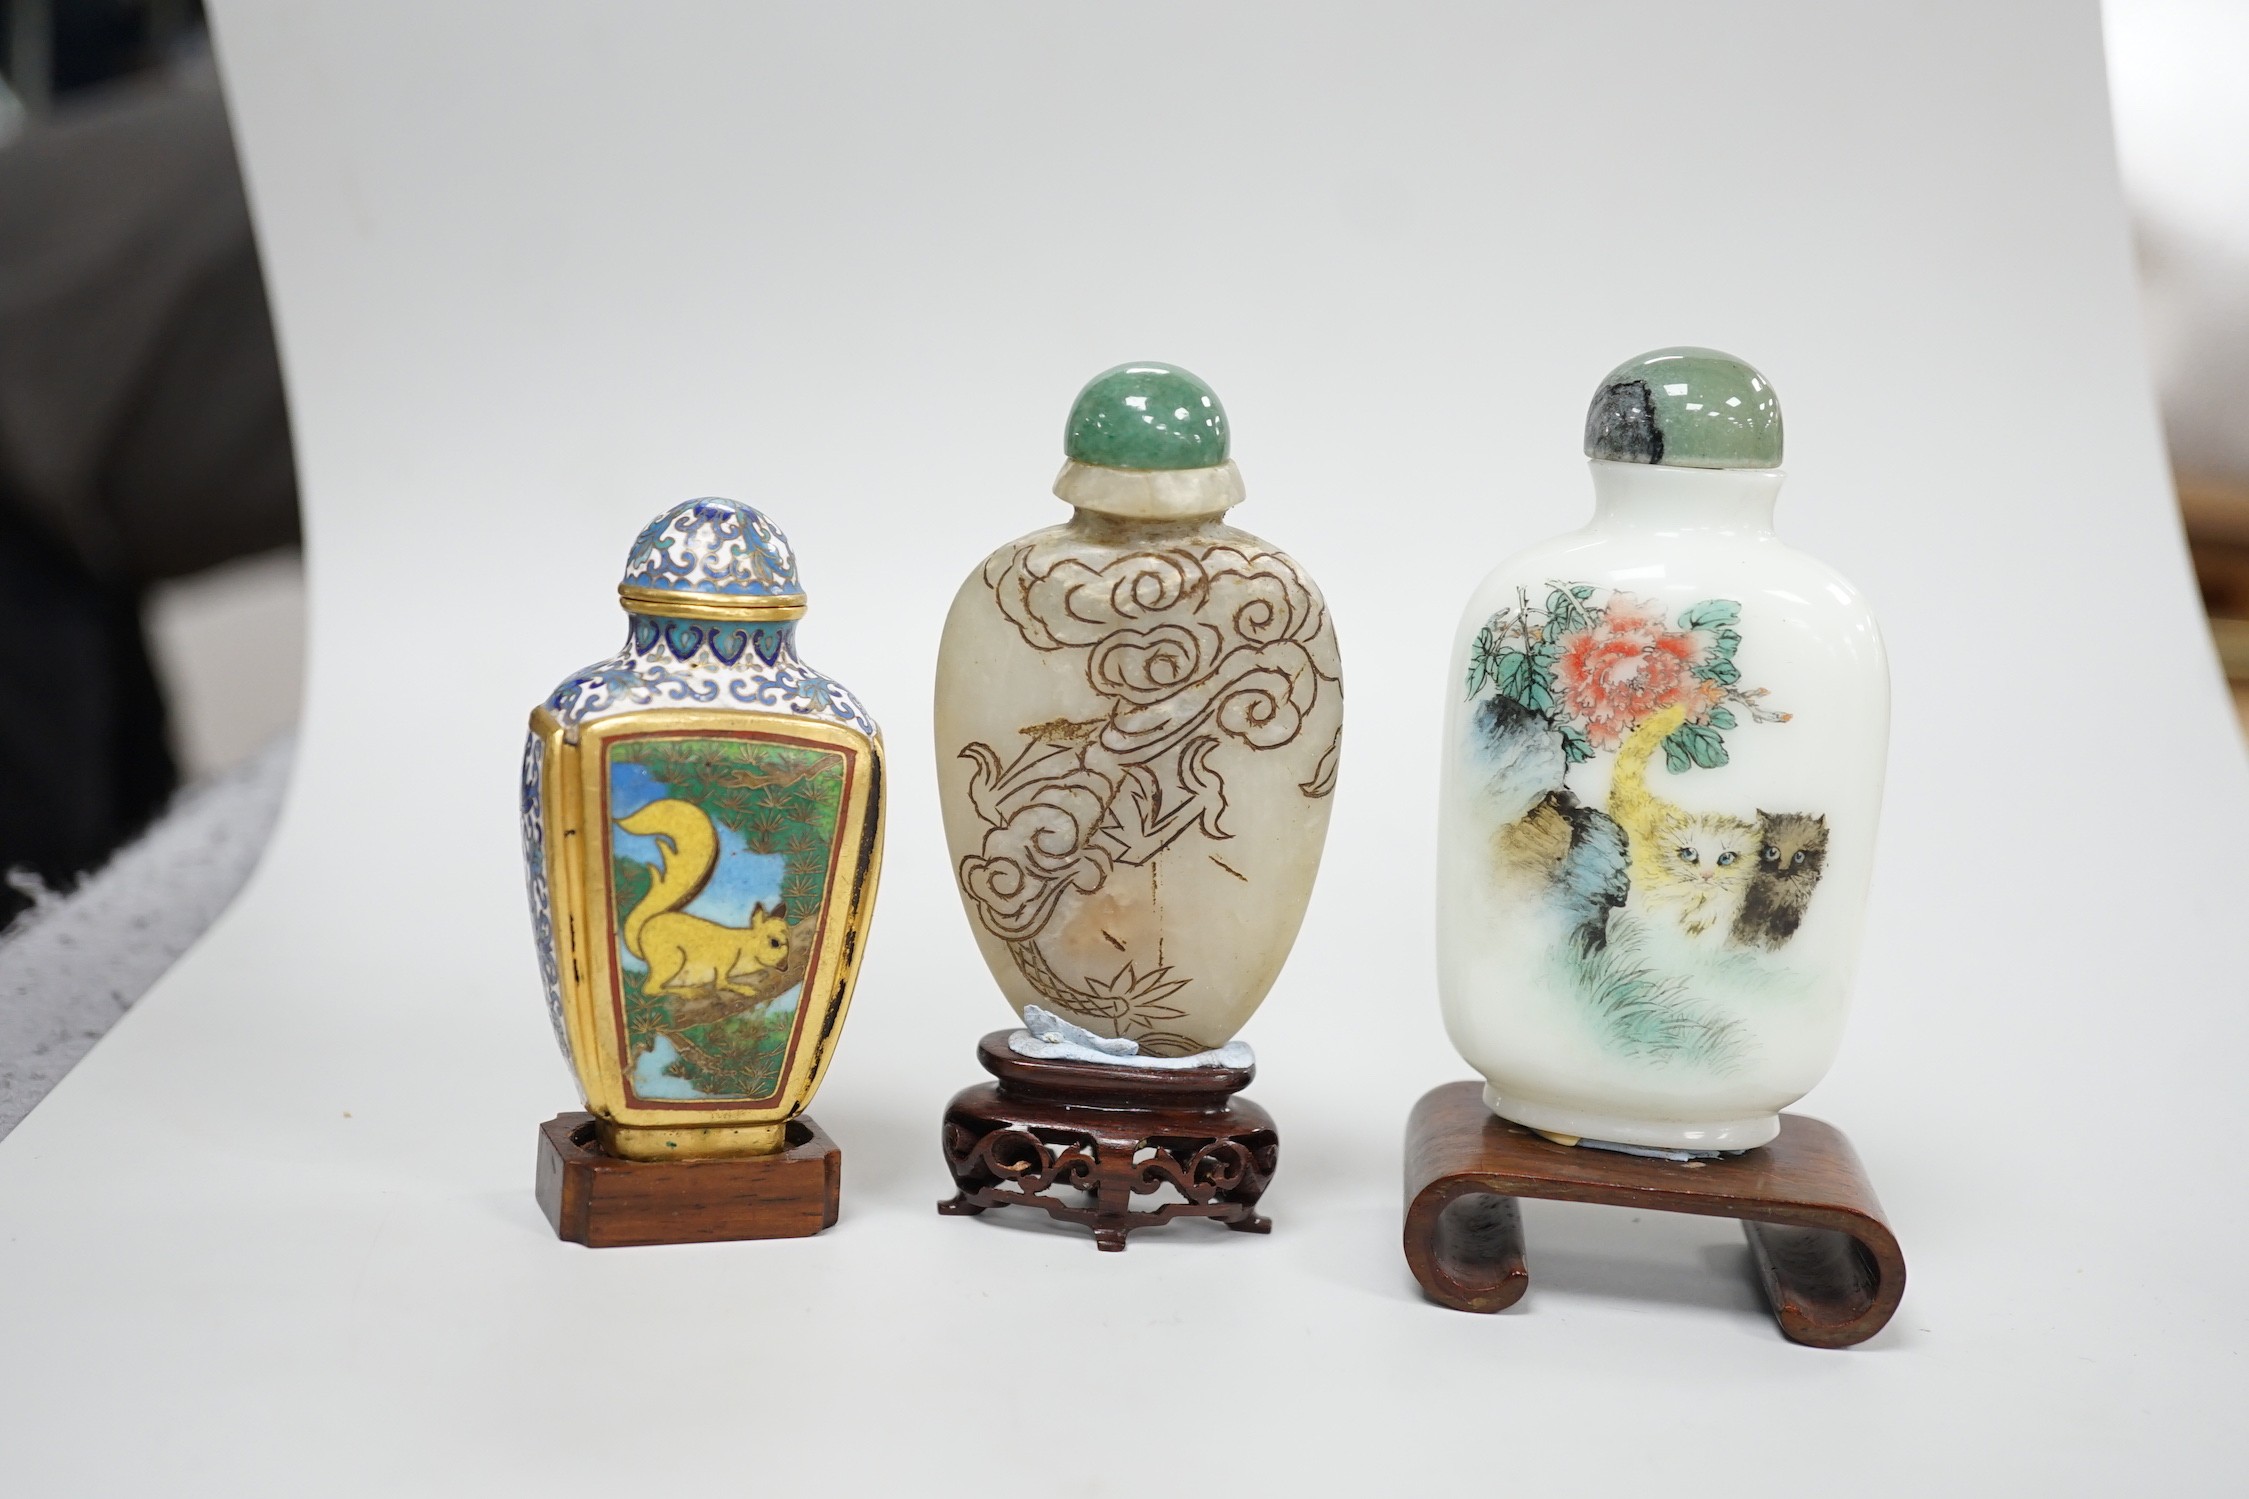 A Chinese cloisonné enamel snuff bottle, enamelled glass and stone snuff bottles. Tallest 8cm (3)